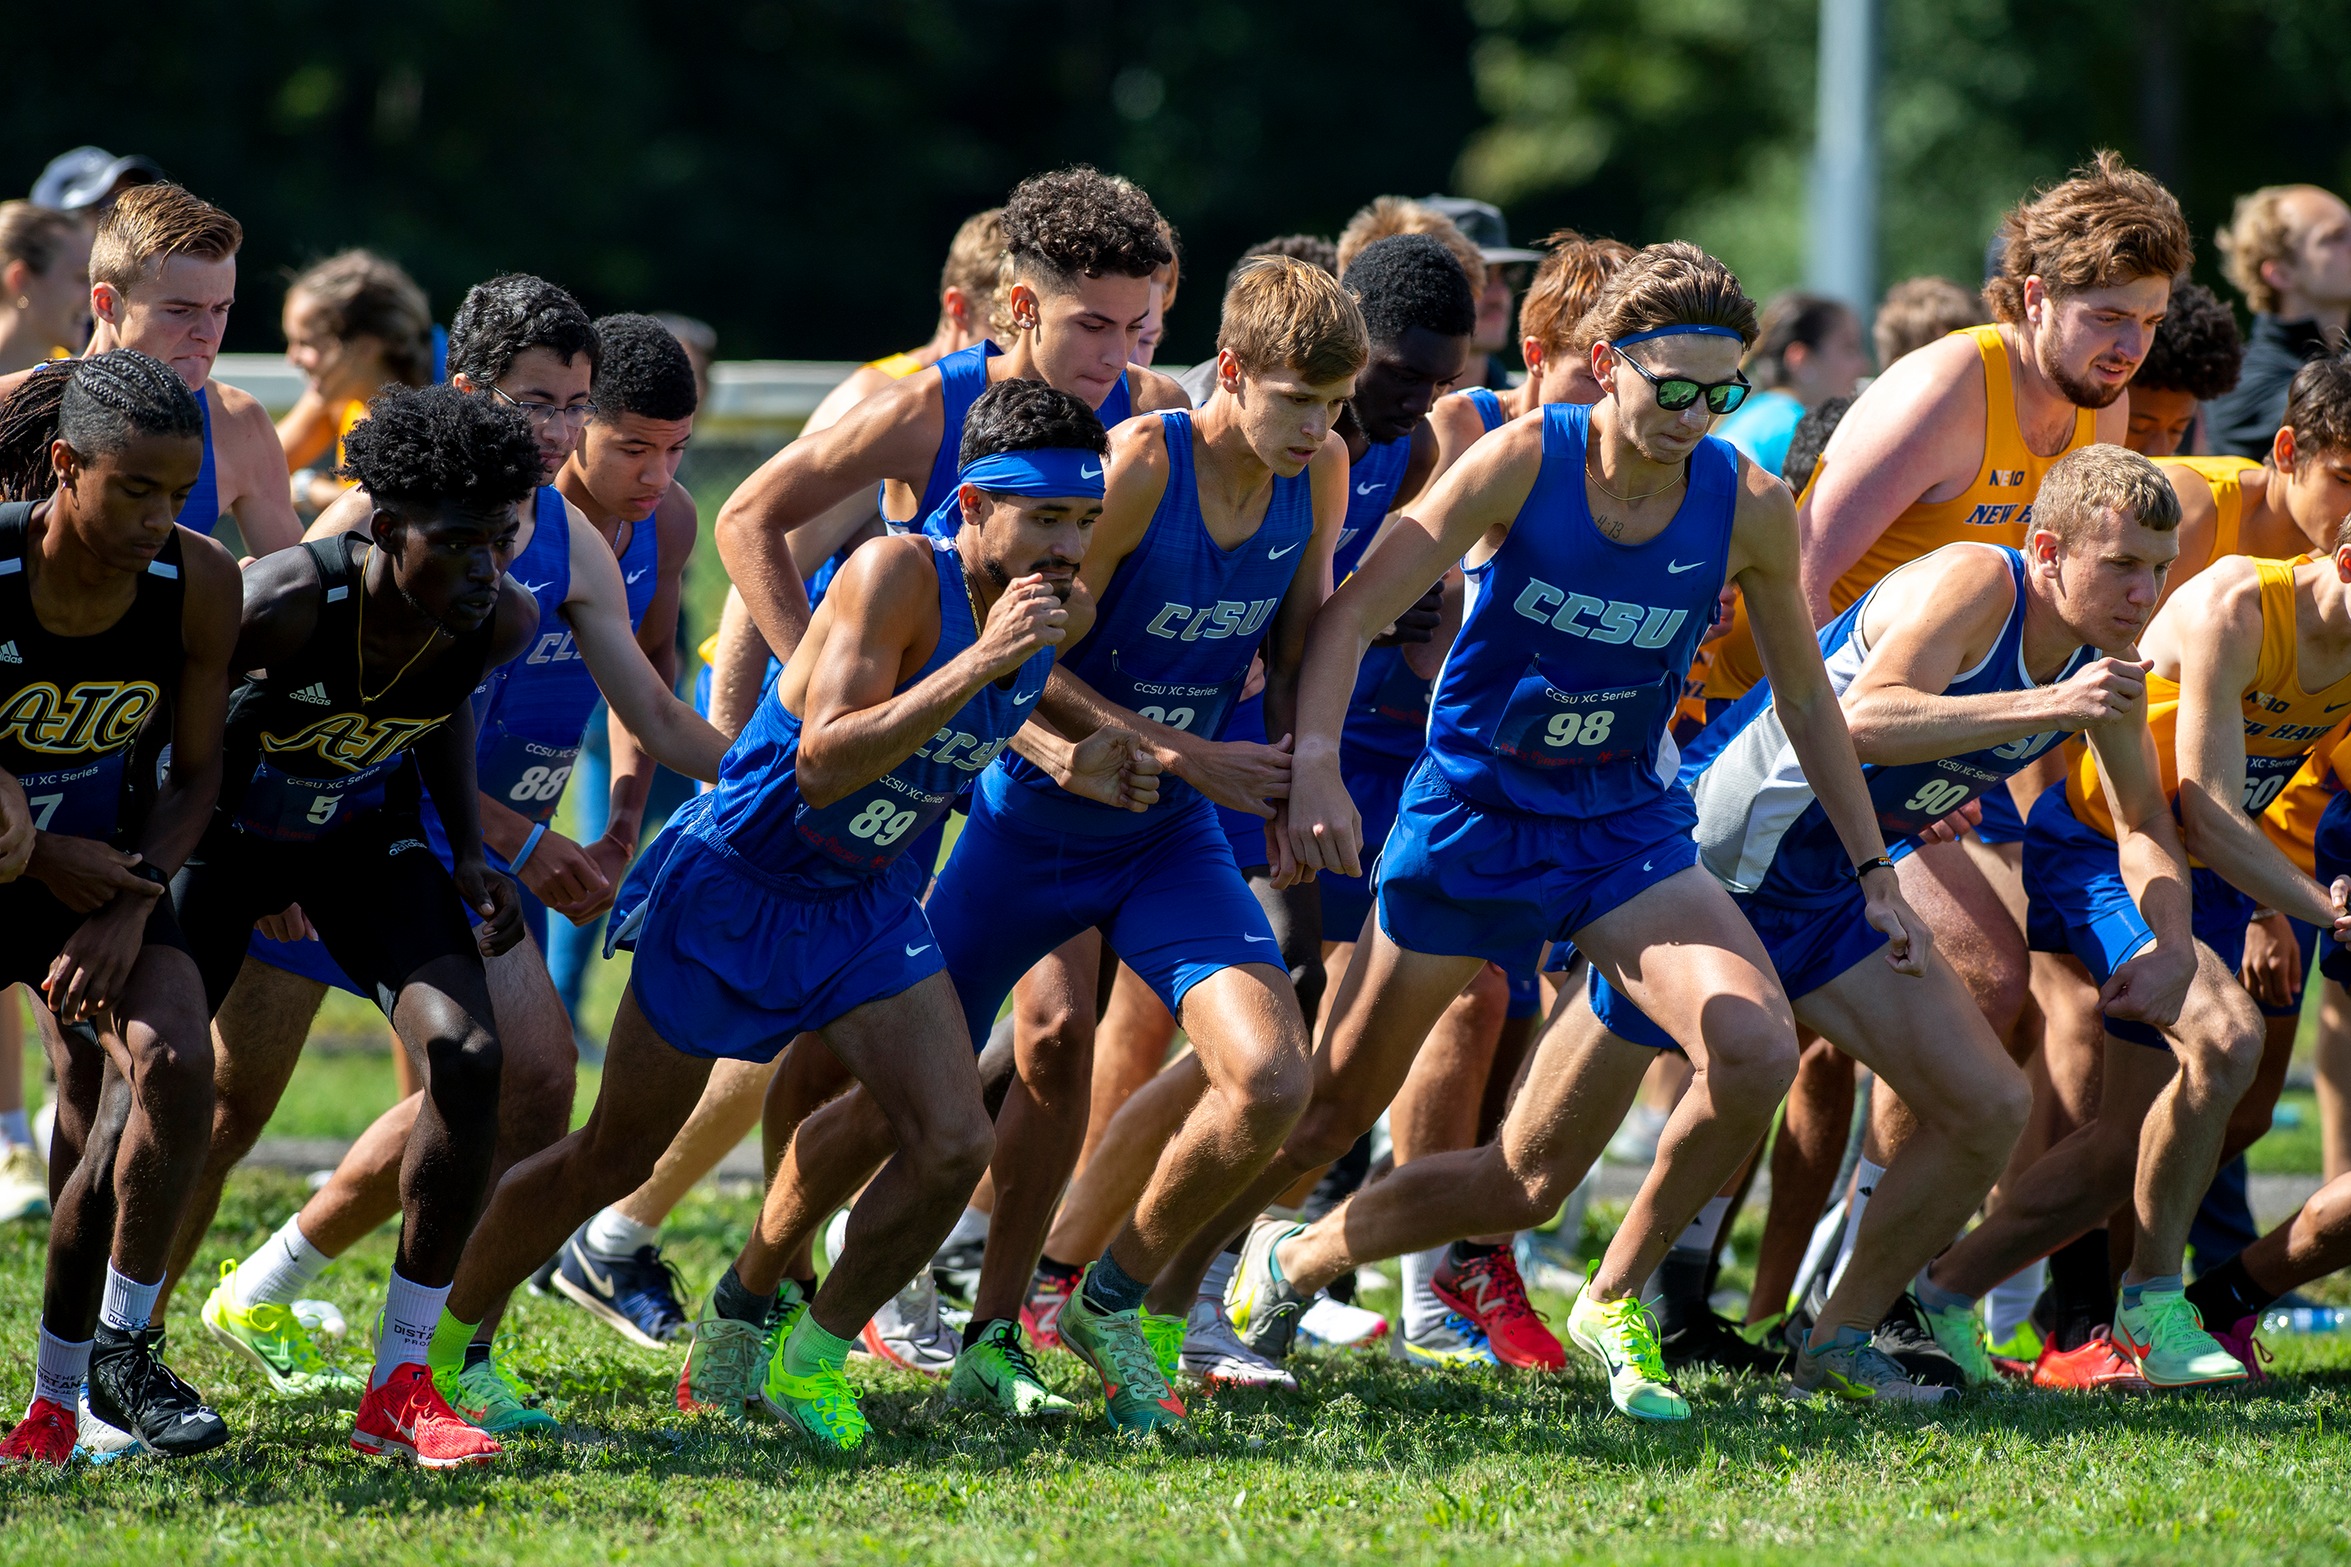 Men's cross country won the 2022 Ted Owen Invitational, paced by the top-three individual finishers. (Credit: Steve McLaughlin)